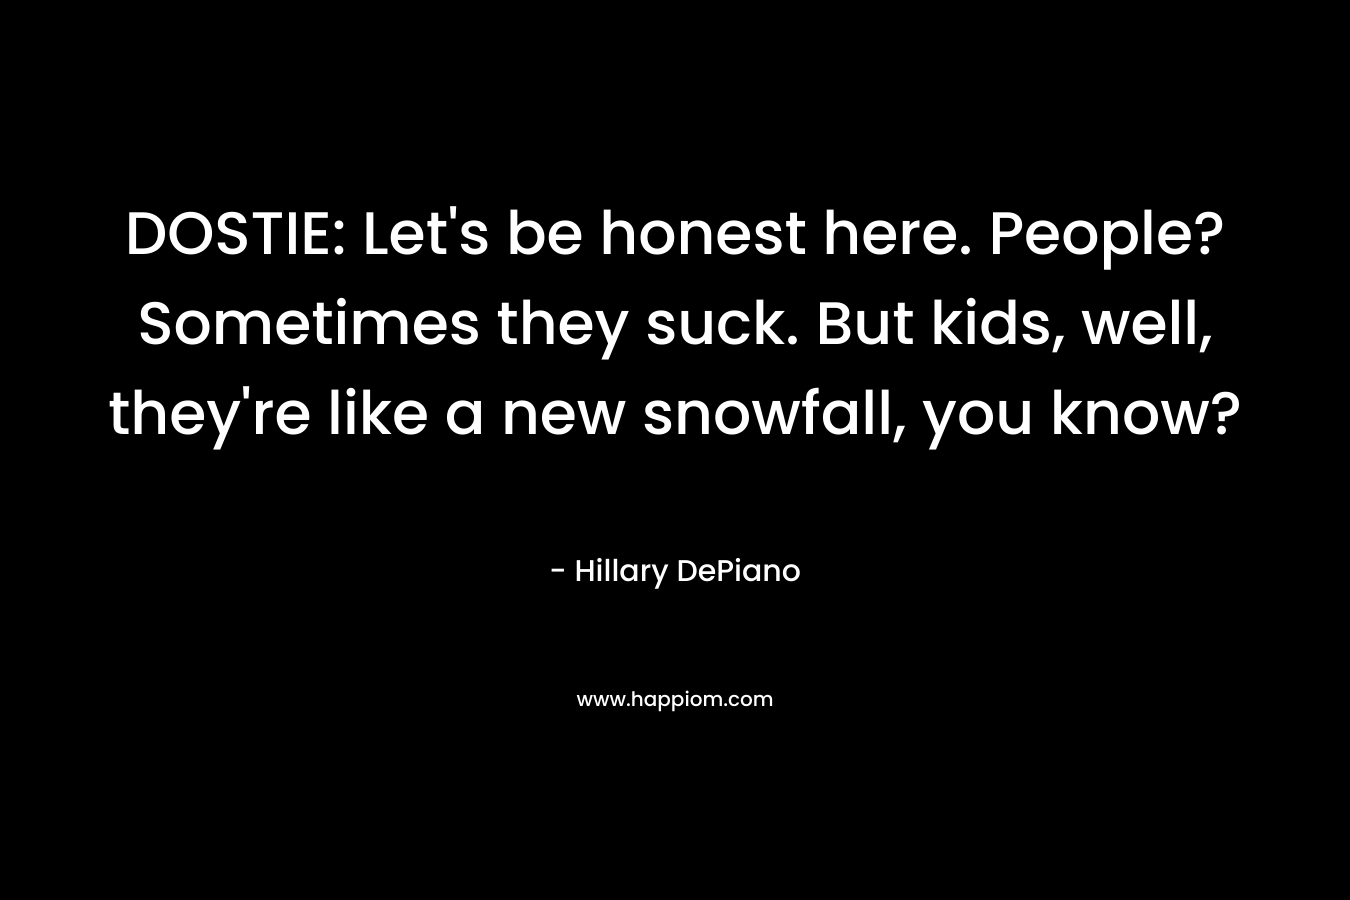 DOSTIE: Let’s be honest here. People? Sometimes they suck. But kids, well, they’re like a new snowfall, you know? – Hillary DePiano